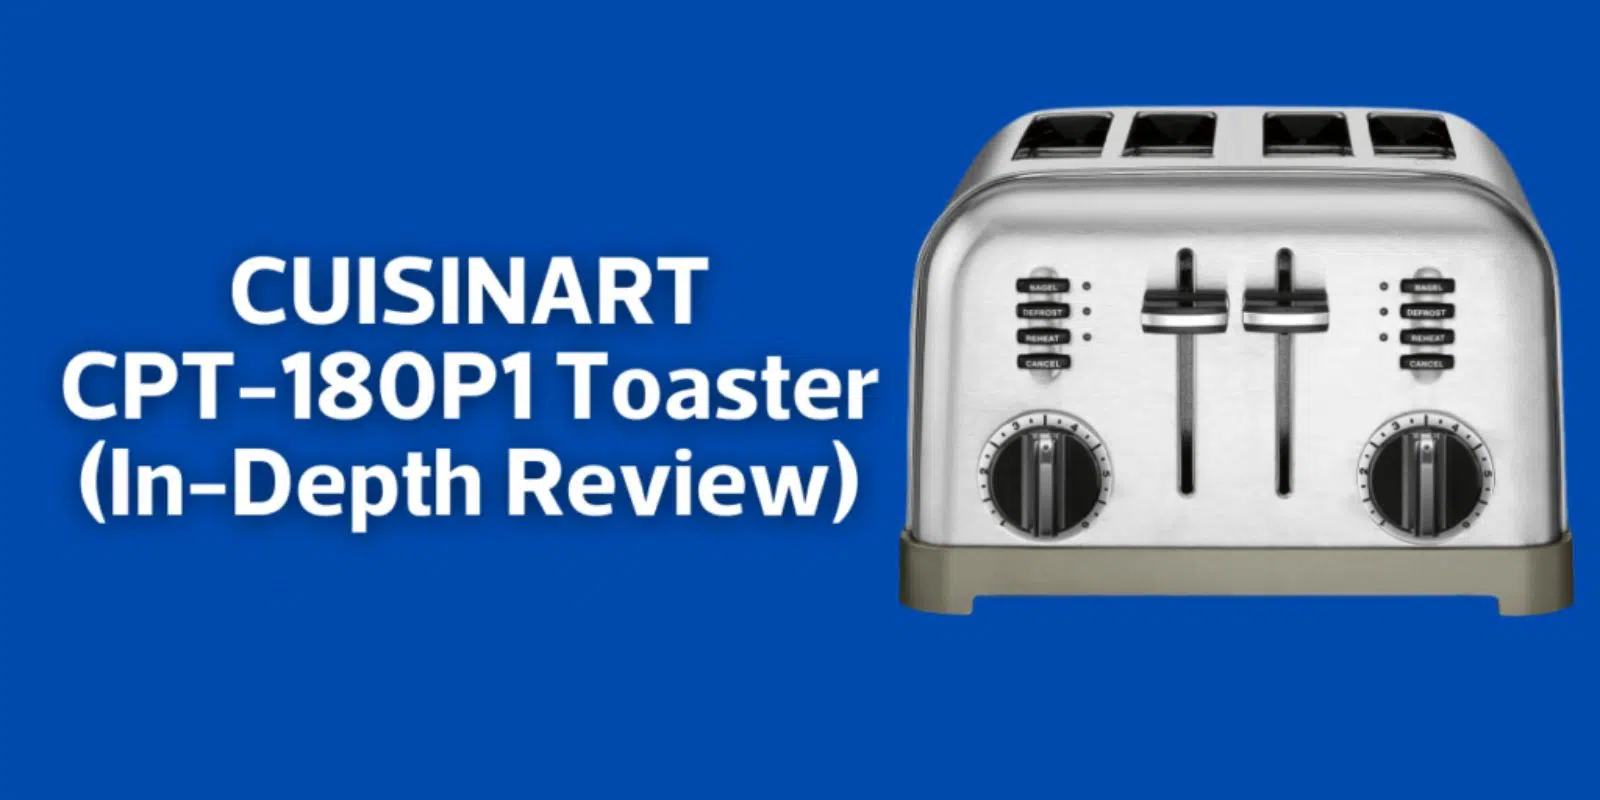 CUISINART CPT-180P1 Toaster (In-Depth Review) | Features, Pros & Cons